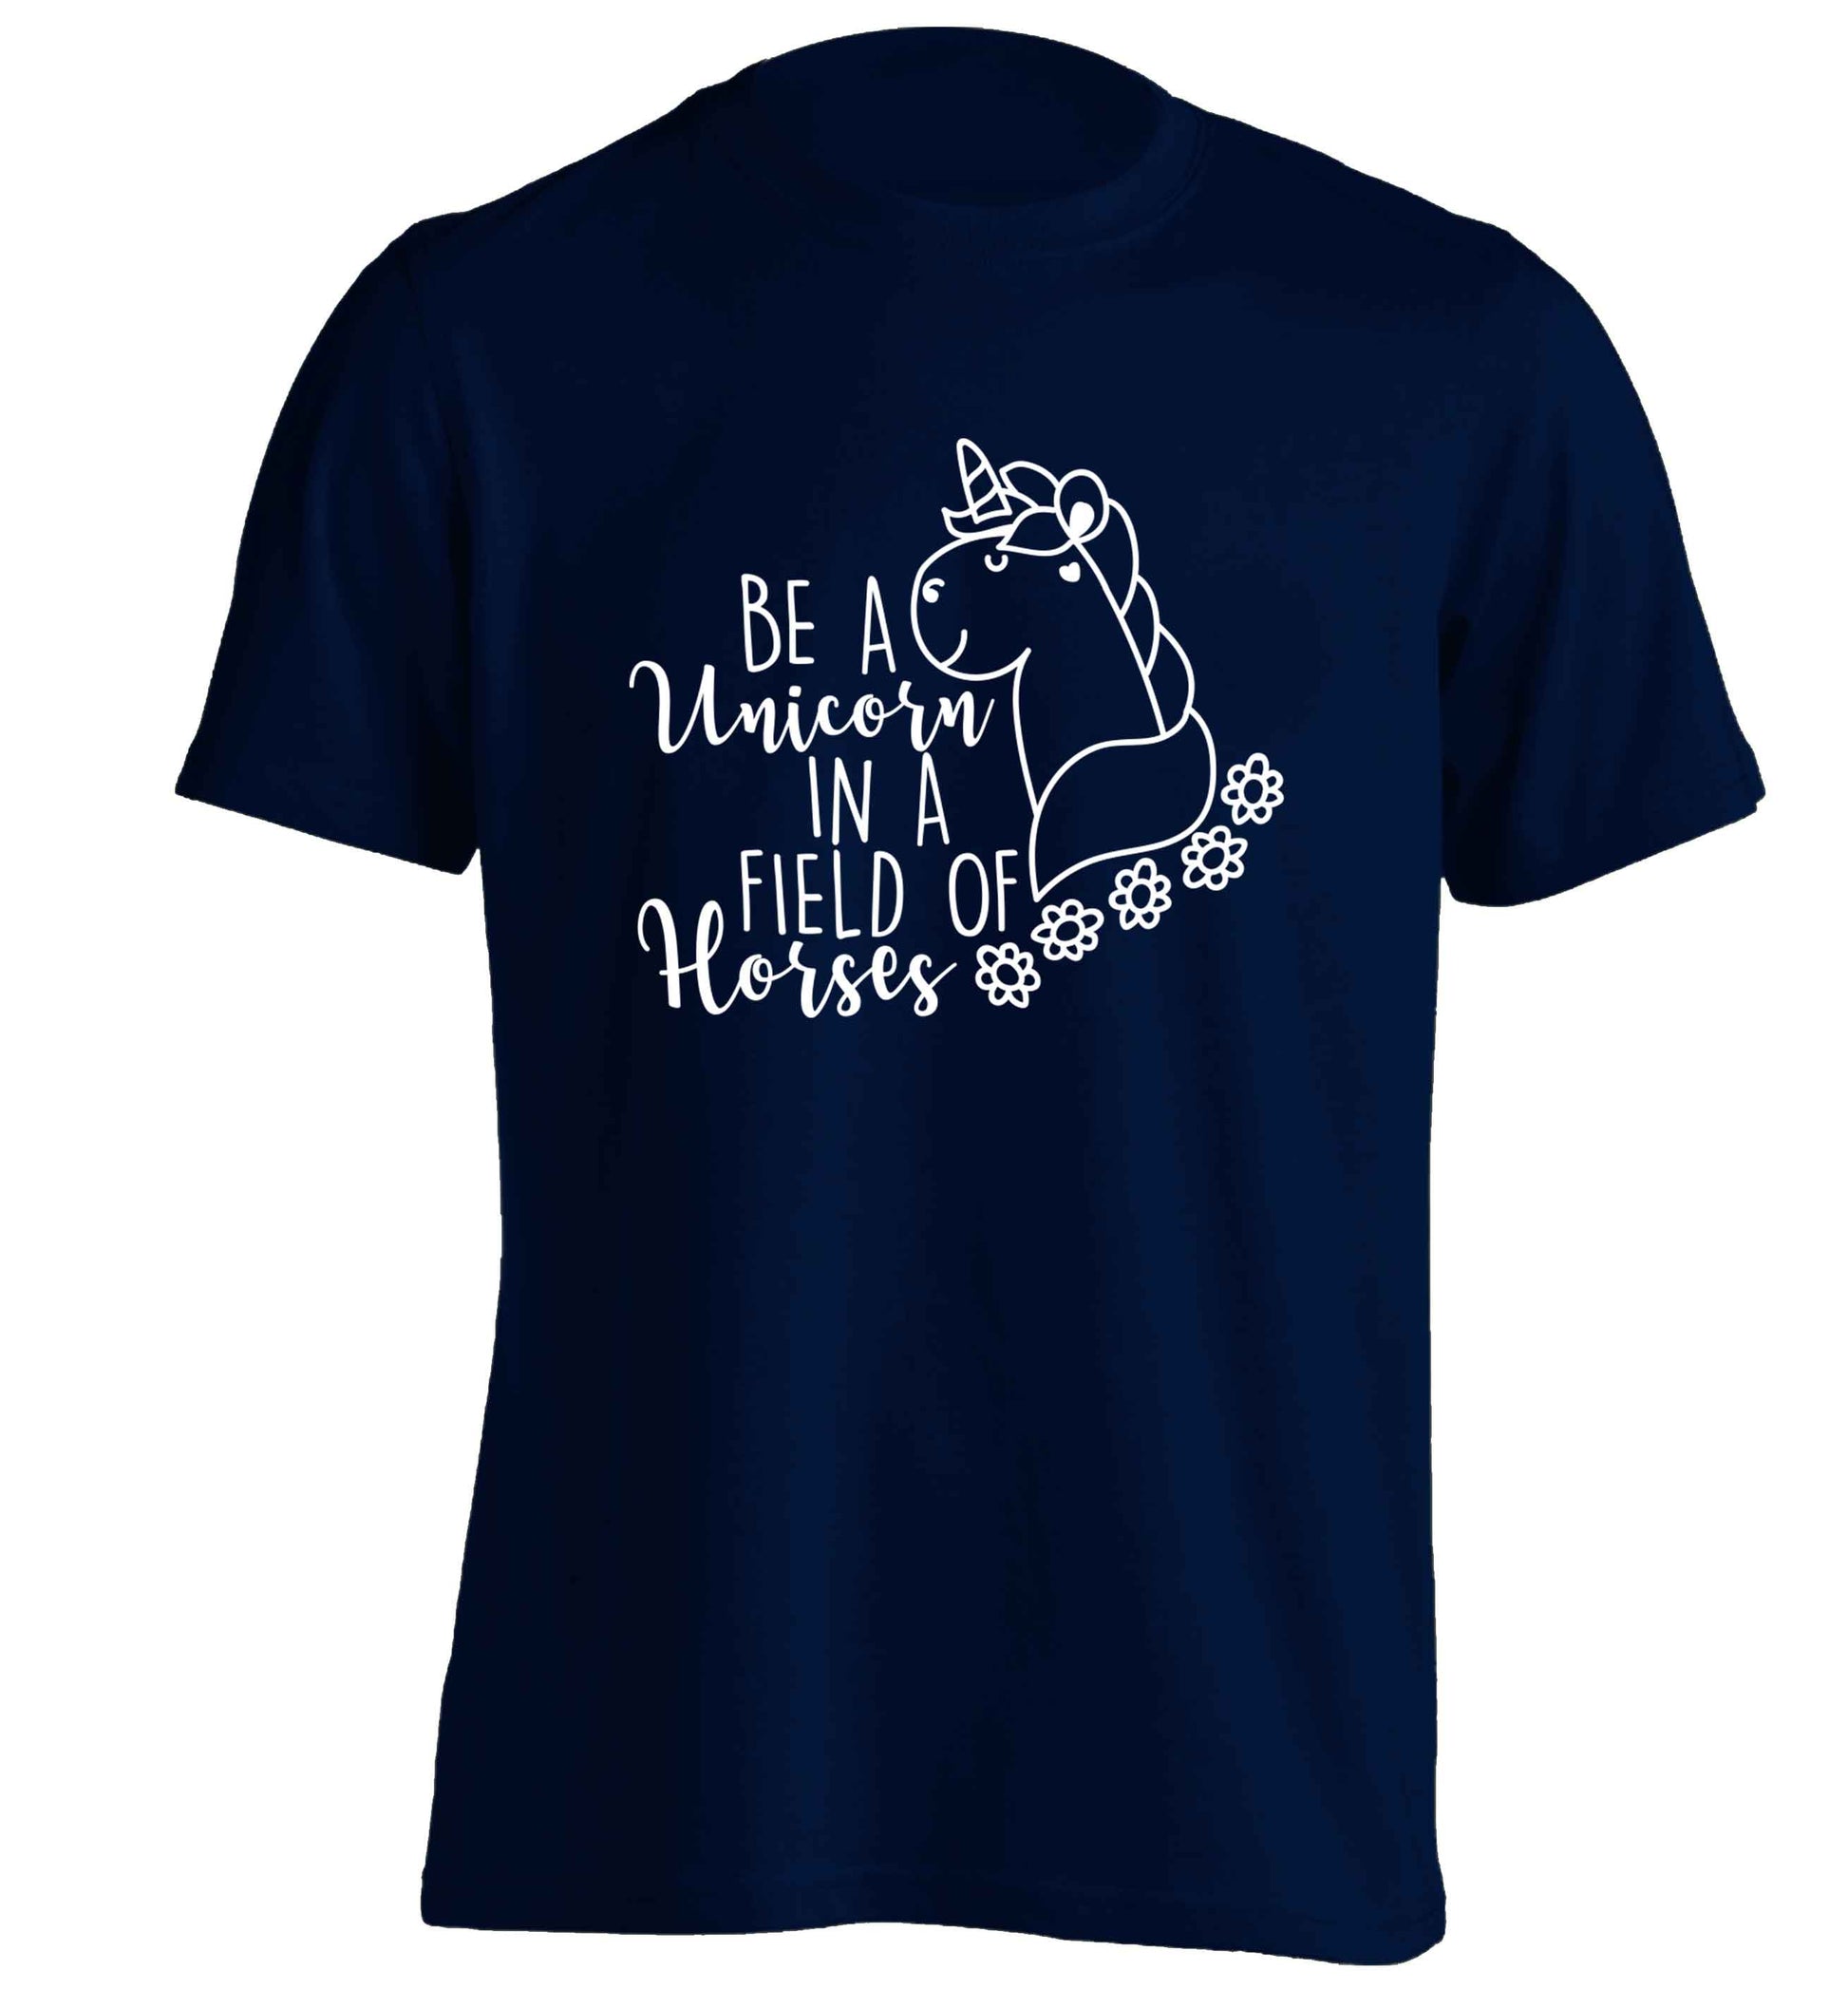 Be a unicorn in a field of horses adults unisex navy Tshirt 2XL